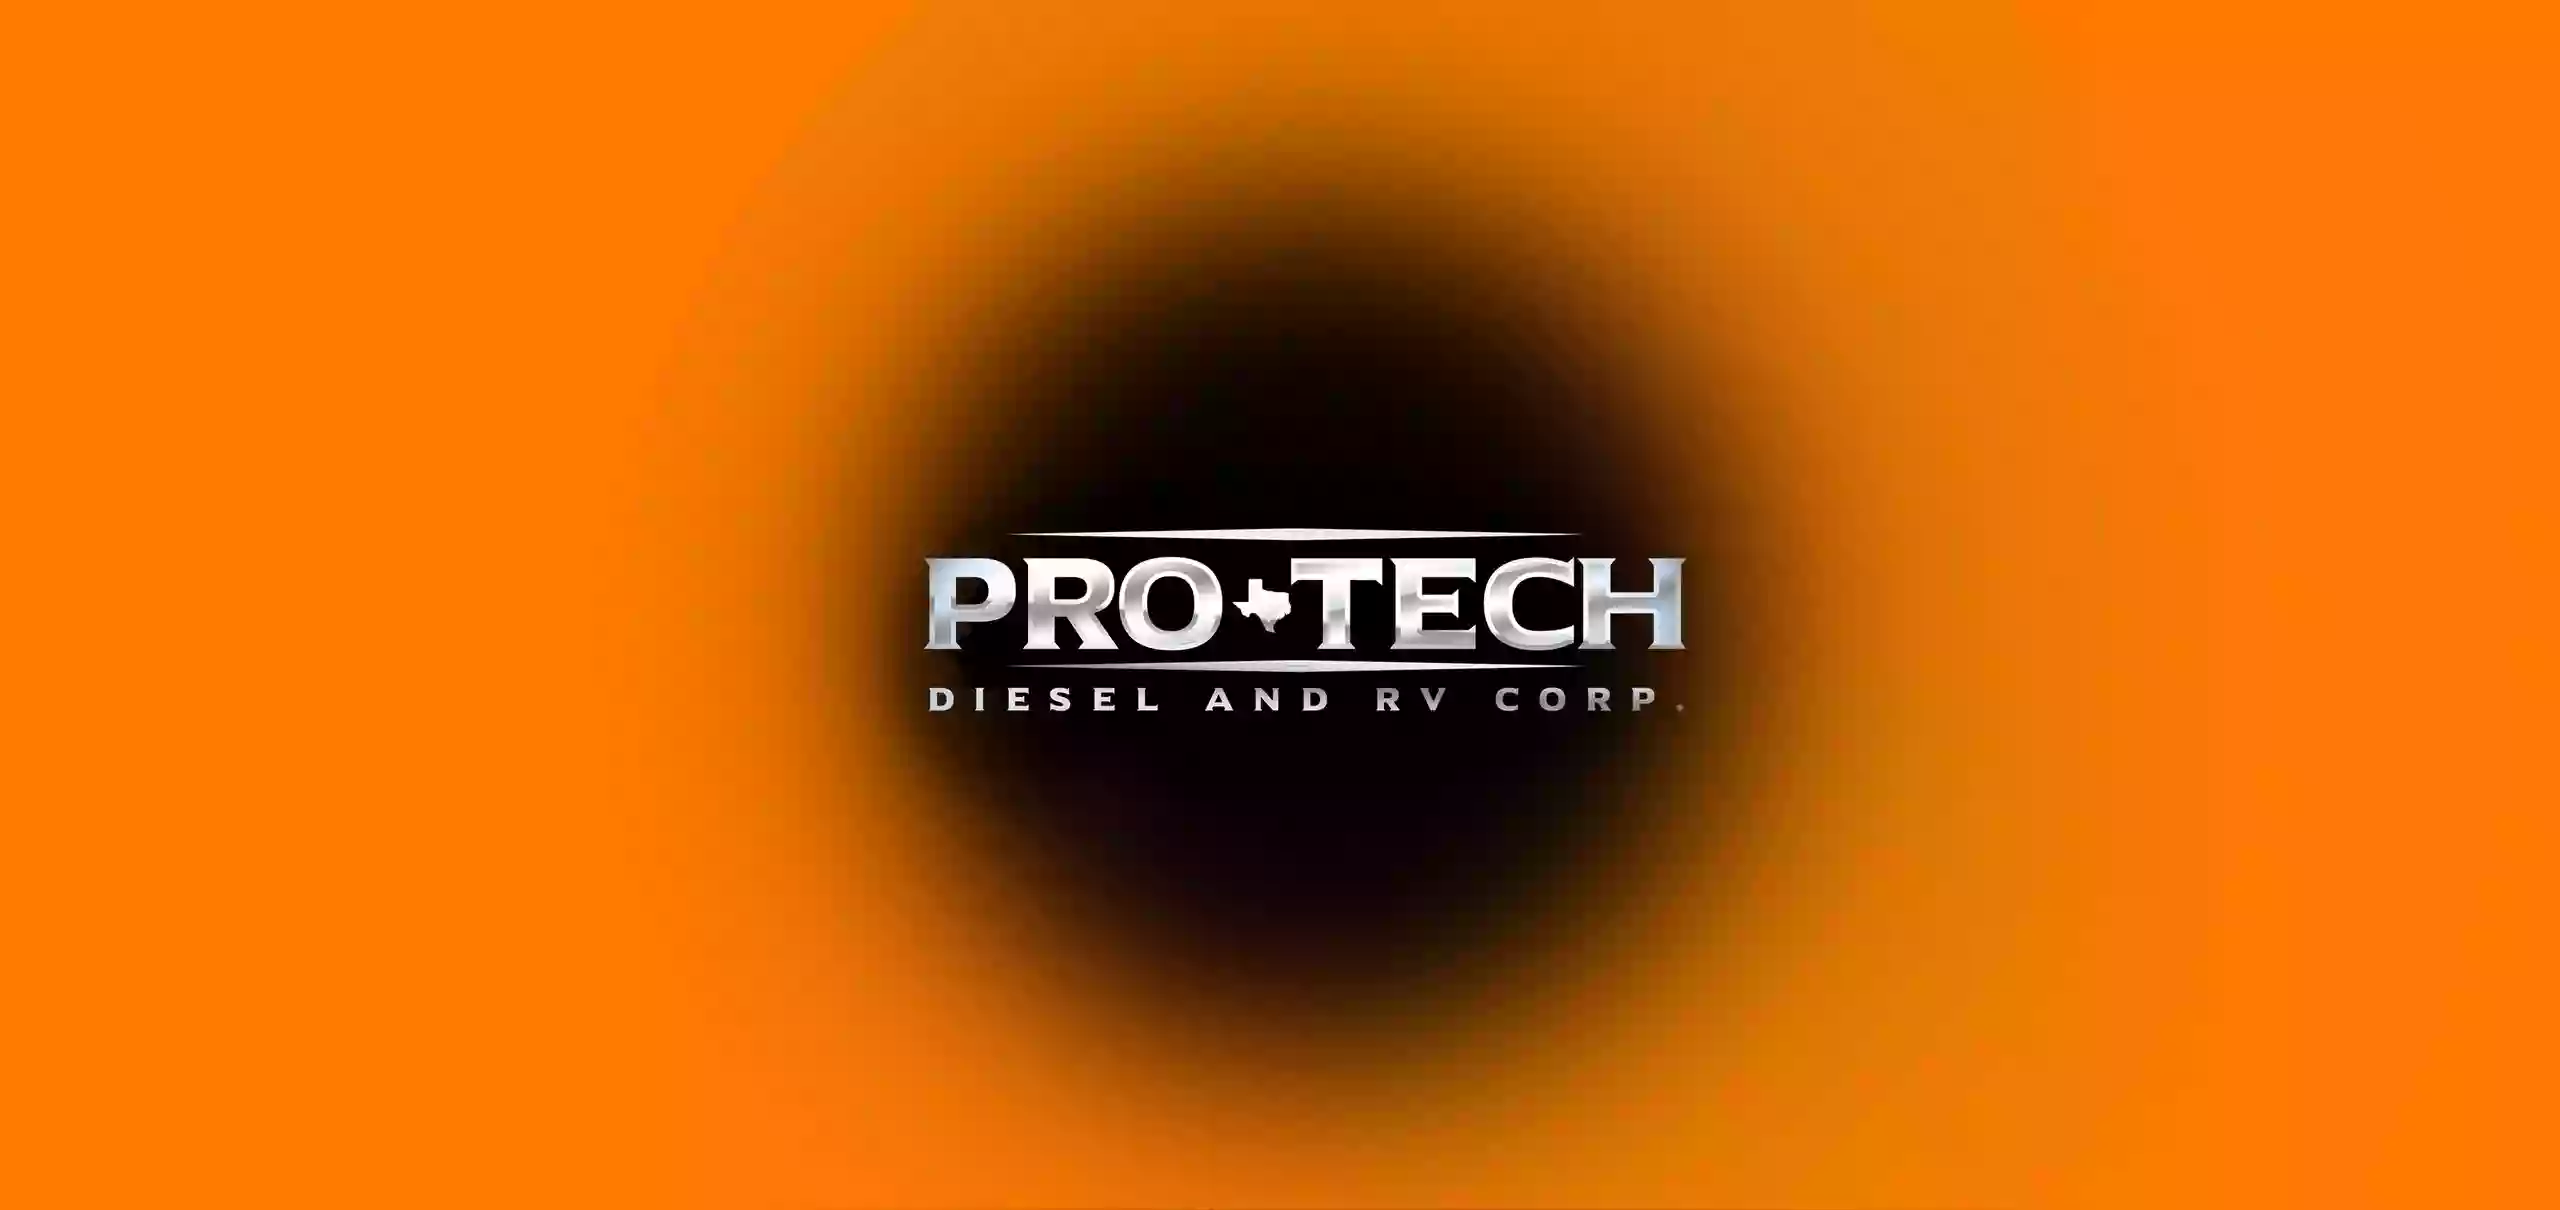 Pro Tech Diesel and RV Corp